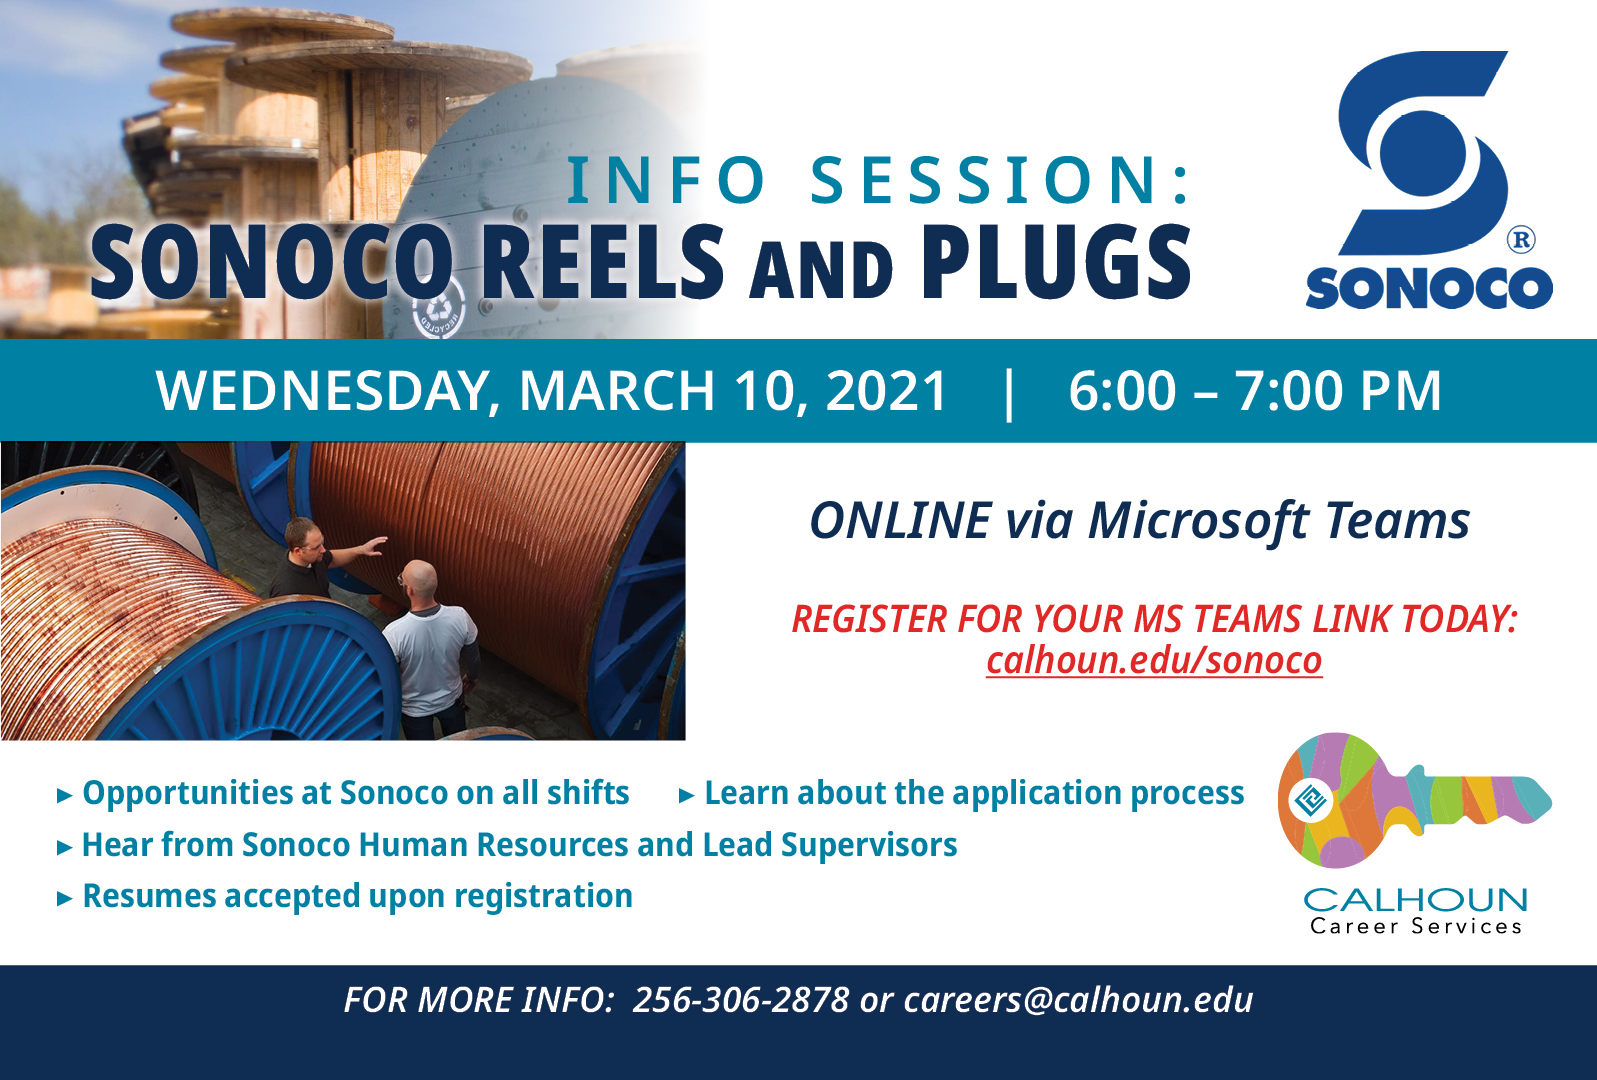 Info Session - Sonoco Reels and Plugs